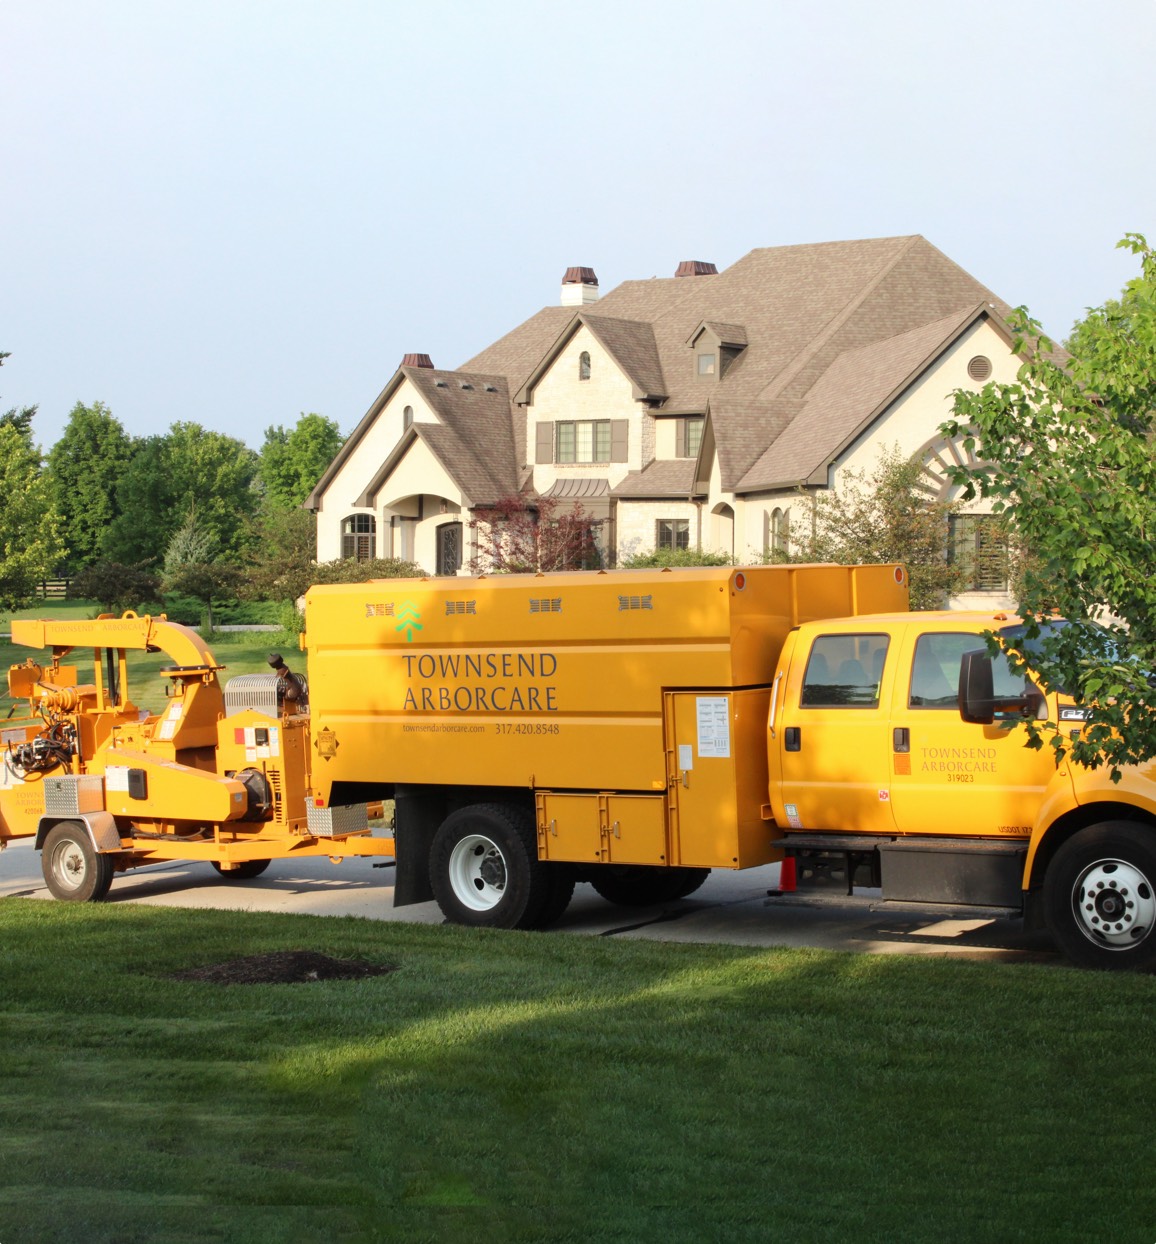 Townsend Arborcare specialists coordinate to remove storm damaged trees and restore trees effectively.